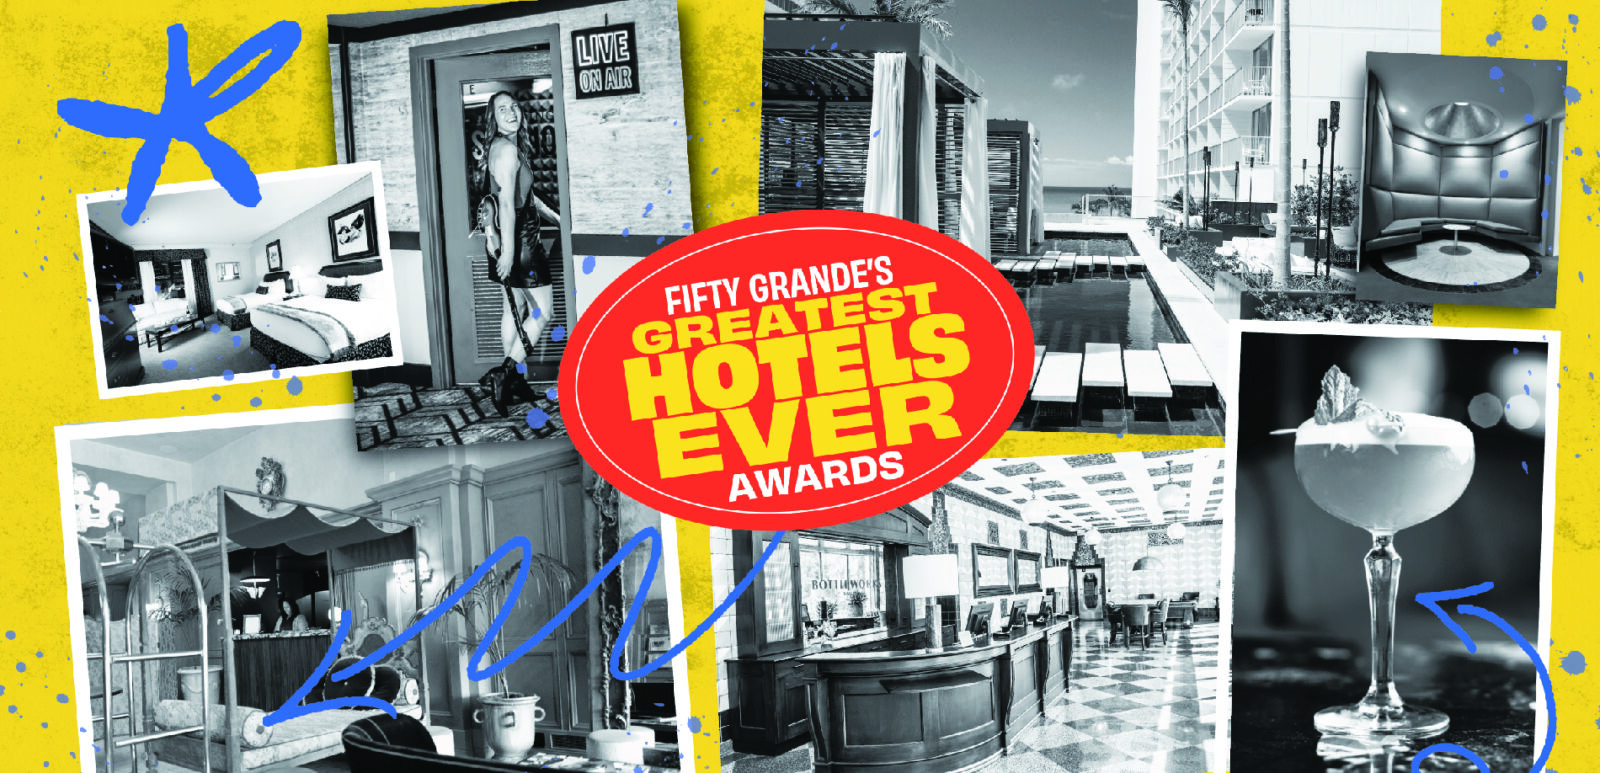 ‘Greatest Hotels Ever’ Awards: And the Winners Are…